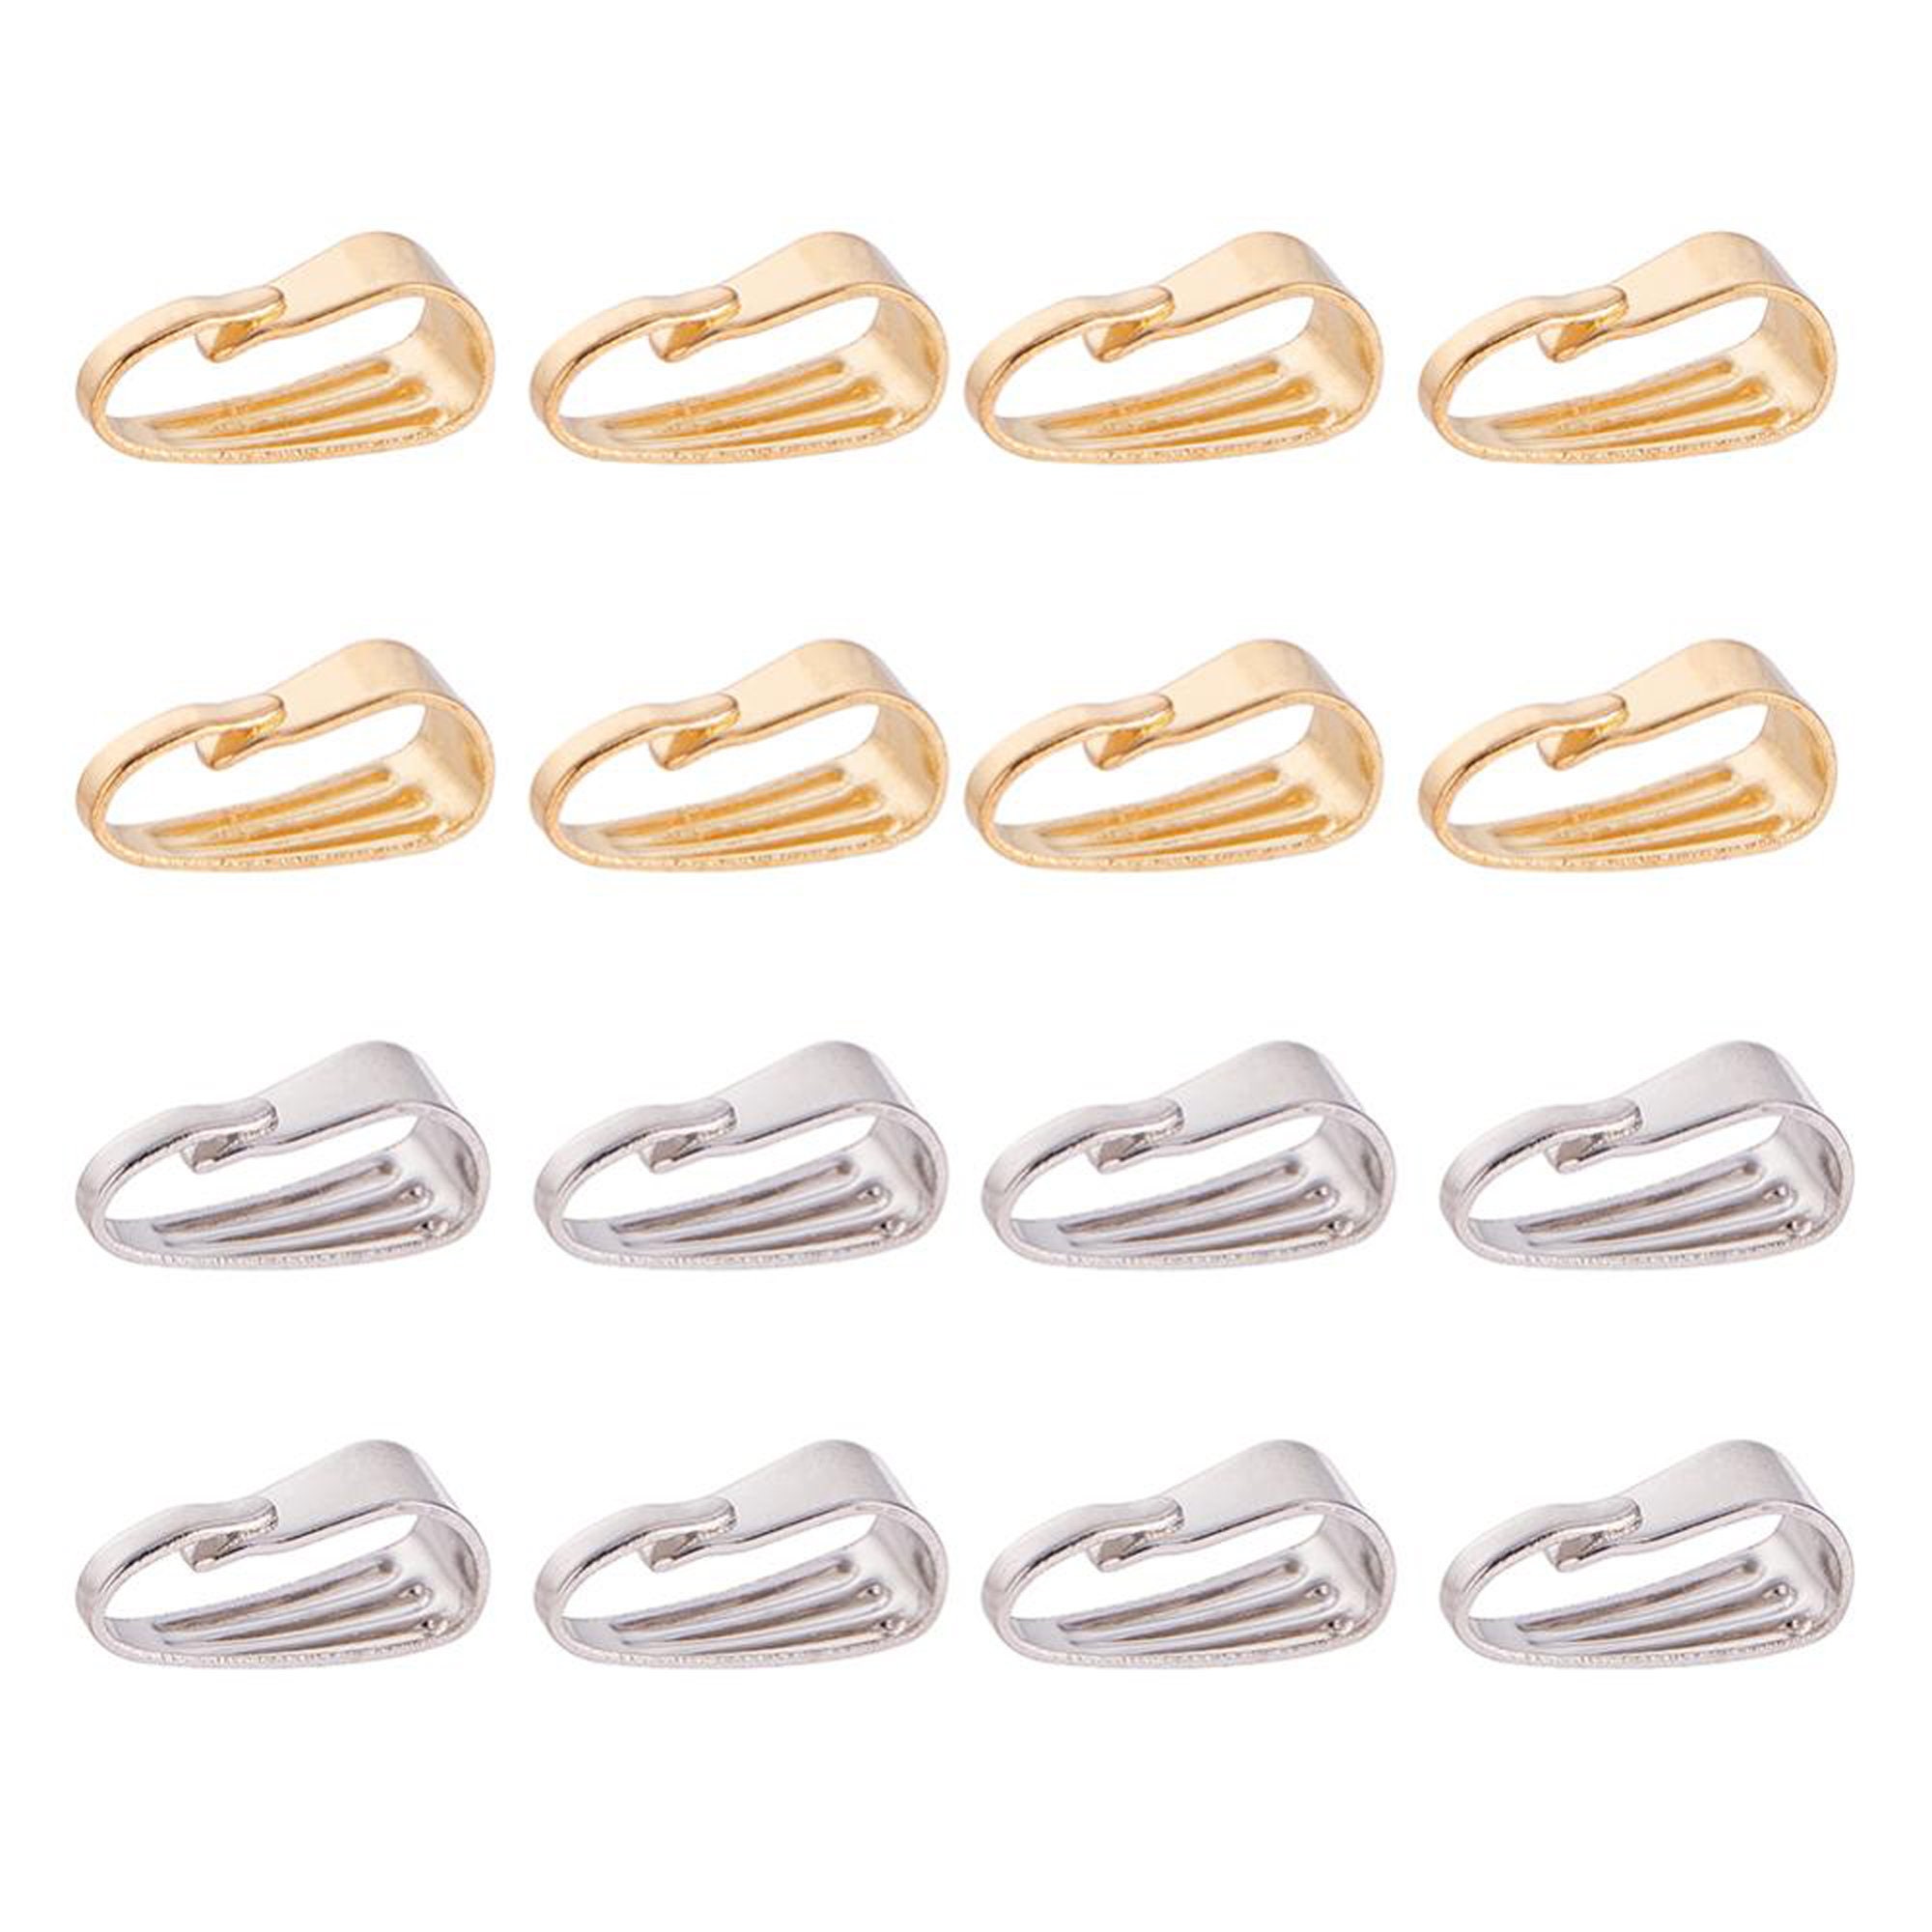 100-500PCS DIY 18K GOLD Jewelry Making Findings Connectors Pinch Bails Sale 